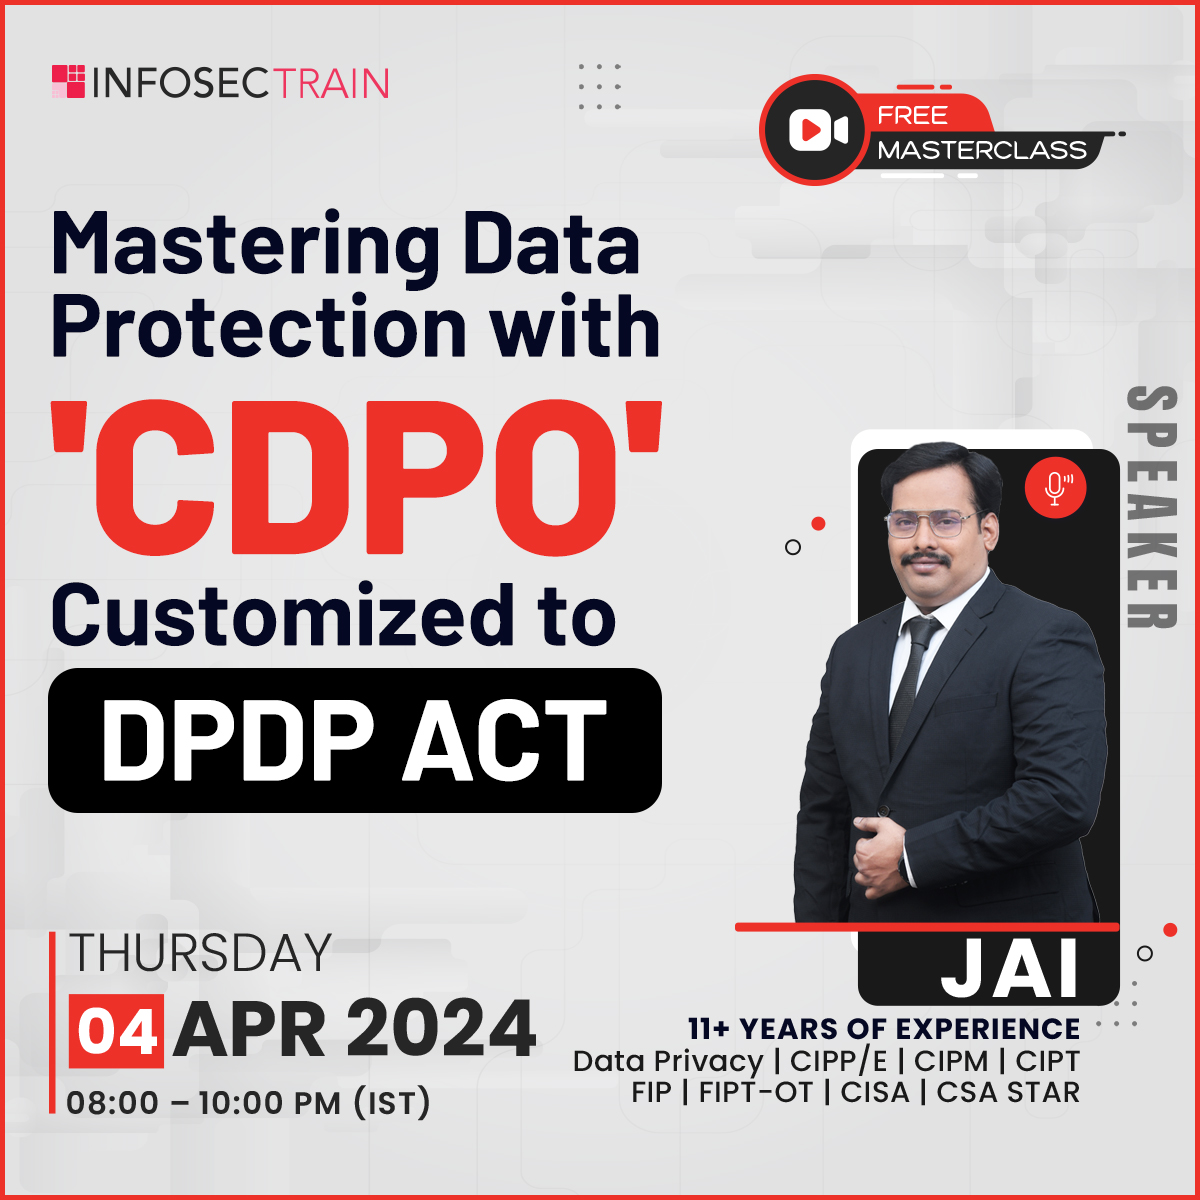 Free session for "Mastering Data Protection with ‘CDPO’ Customized to DPDP Act", Online Event